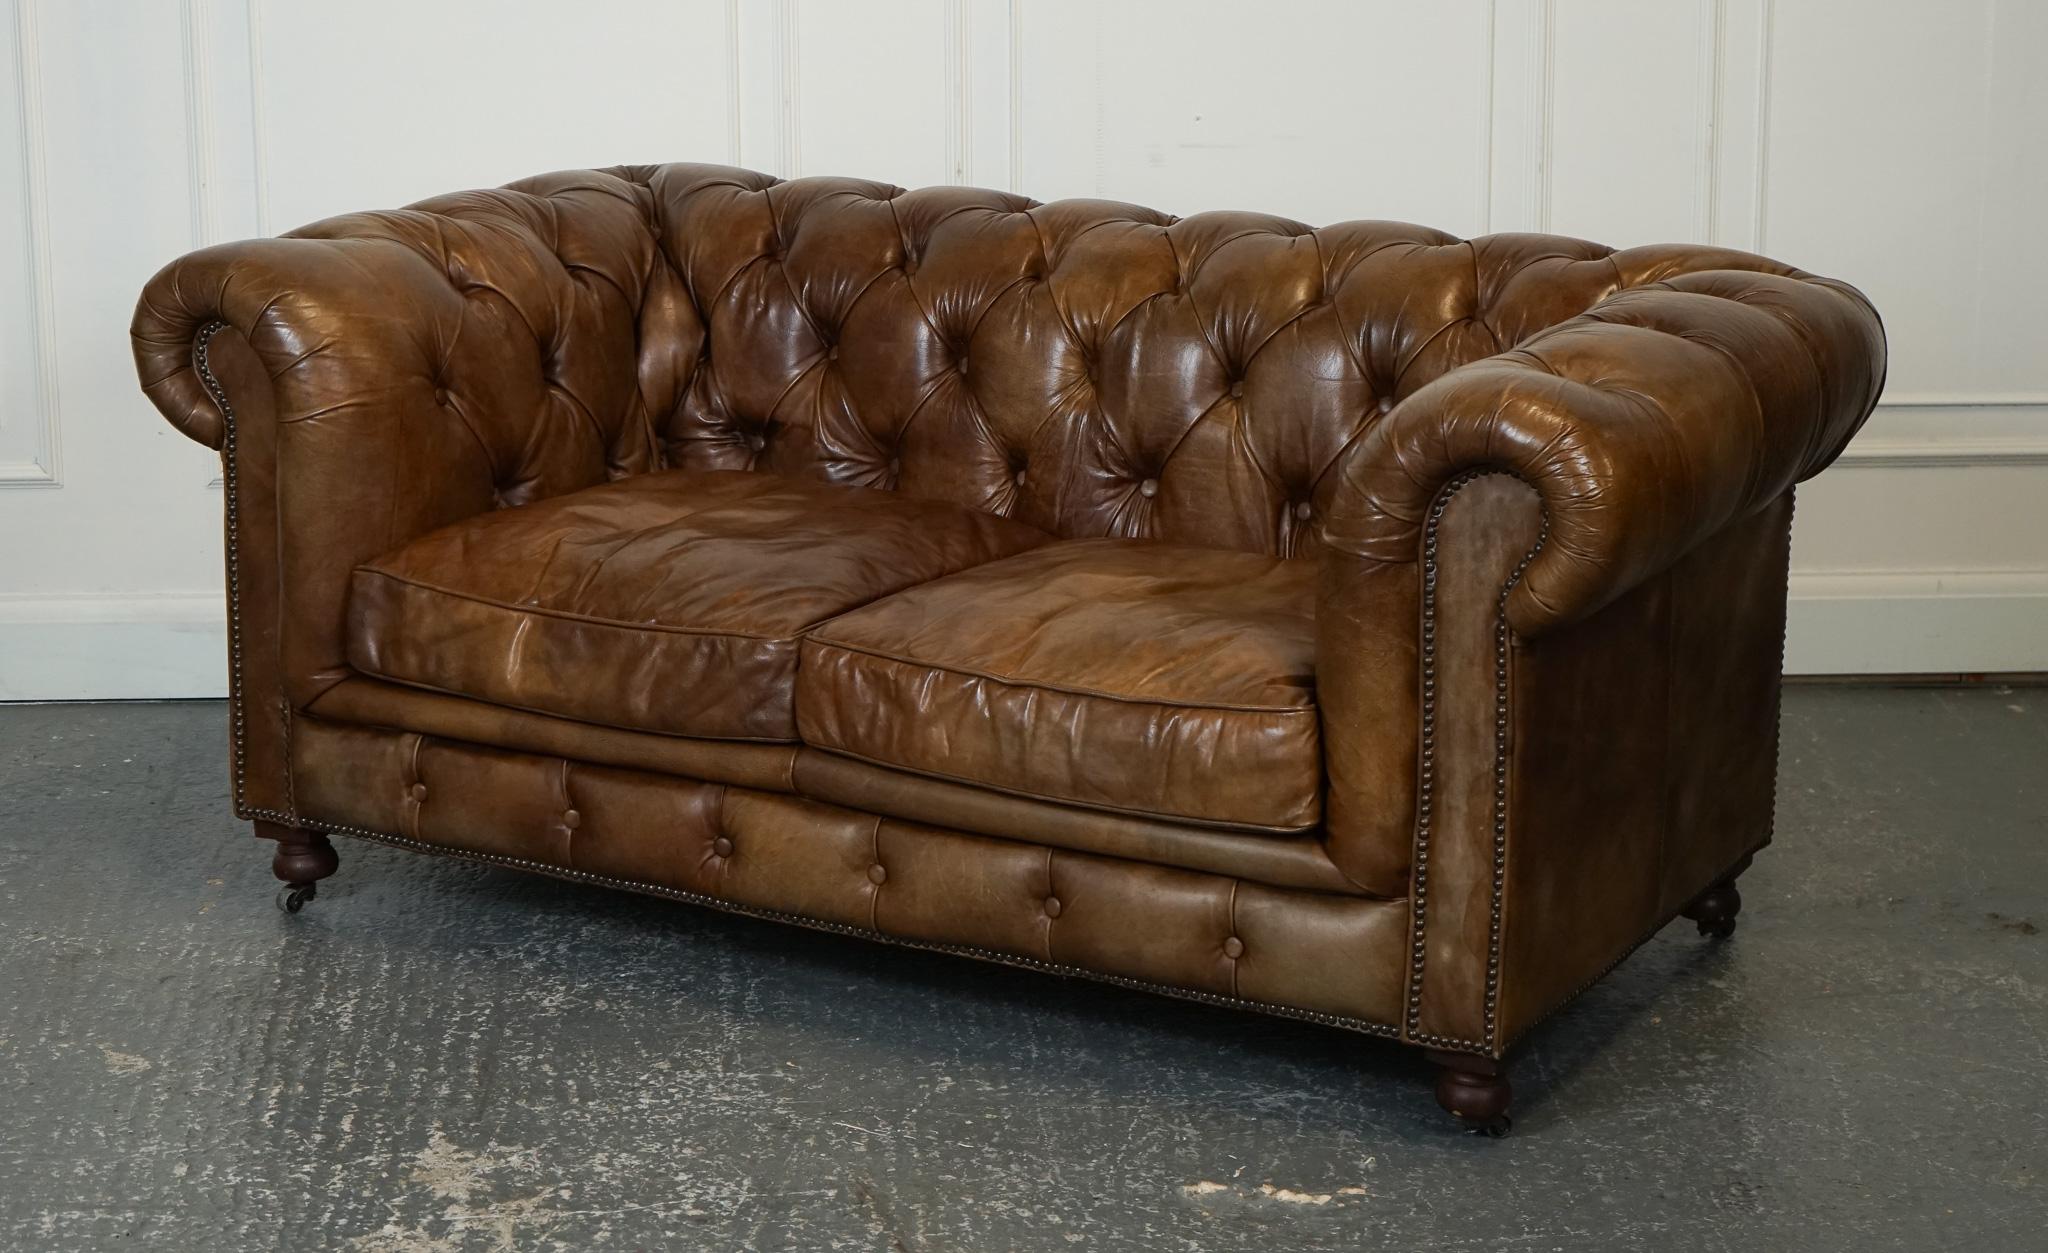 
We are delighted to offer for sale this Gorgeous Heritage Brown Chesterfield Leather Sofa By Halo.

The gorgeous Chesterfield sofa by Halo is a true statement piece that exudes luxury and elegance. Upholstered in rich brown leather, this sofa